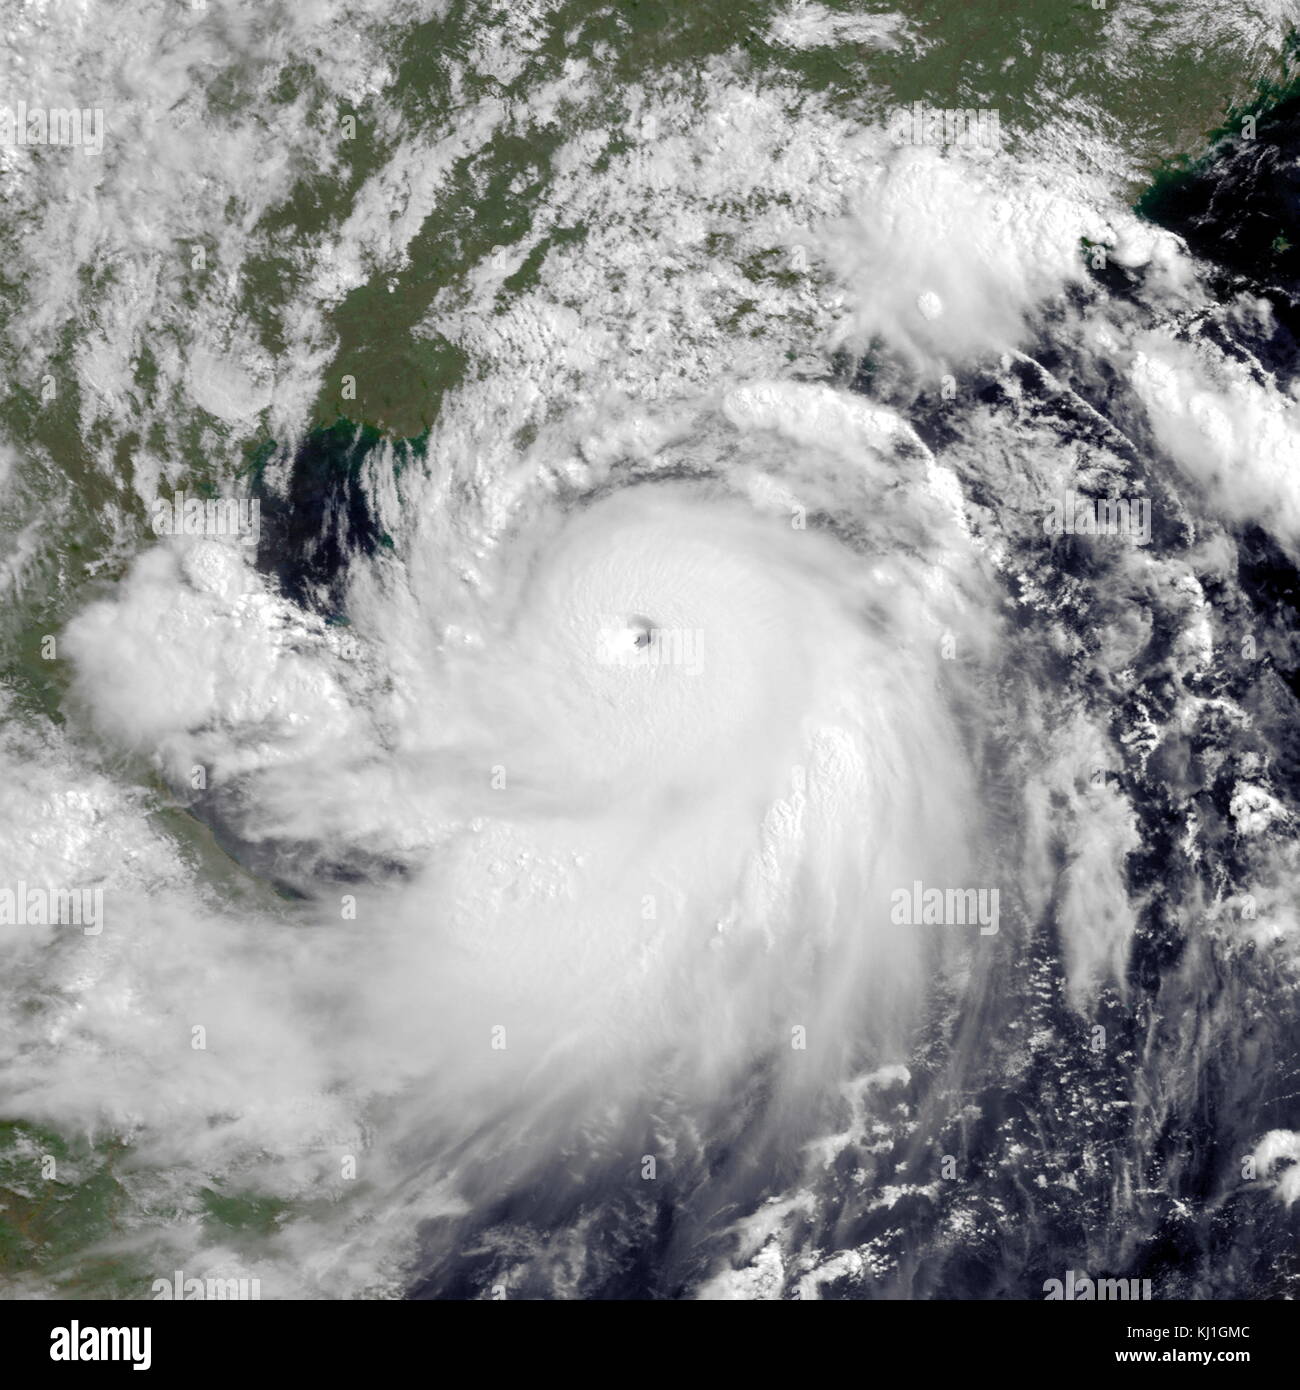 Typhoon Rammasun, known in the Philippines as Typhoon Glenda, was one of only two Category 5 super typhoons on record in the South China Sea, with the other being Pamela in 1954. Rammasun had destructive impacts across the Philippines, South China, and Vietnam in July 2014. Stock Photo